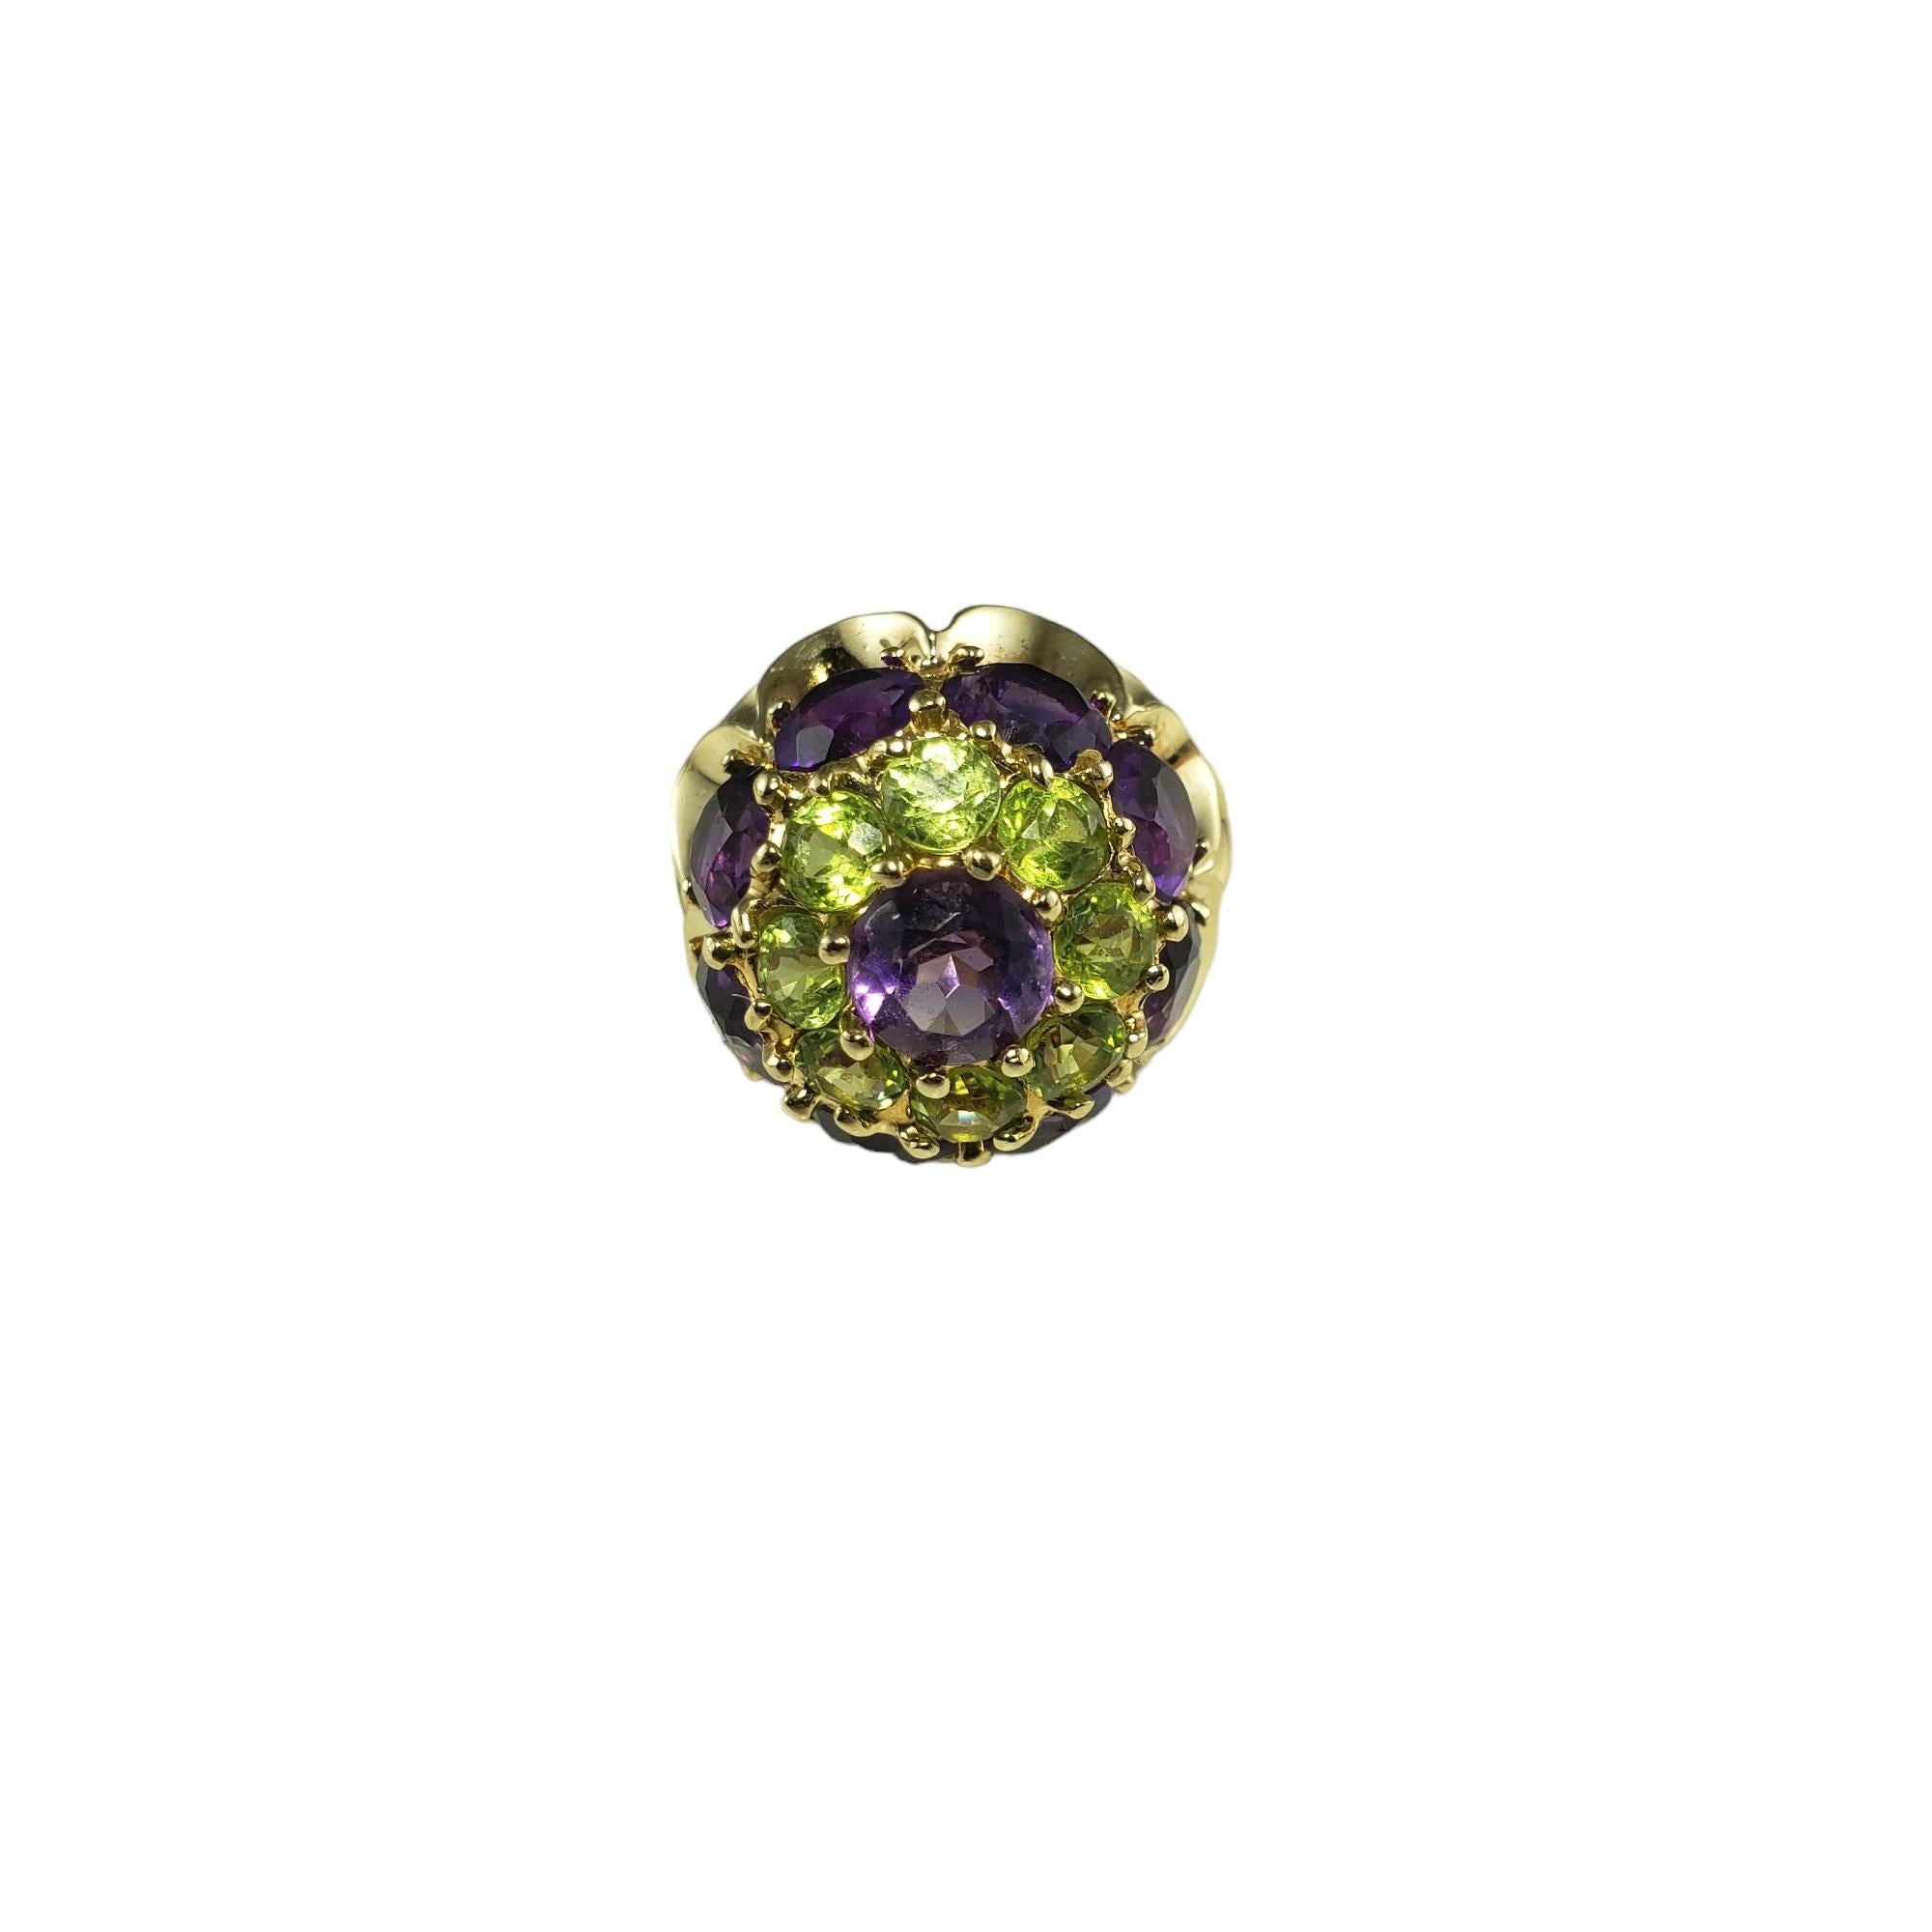 Vintage 14K Yellow Gold Amethyst and Peridot Ring Size 7 Lab Certified-

This elegant ring features nine round cut amethyst stones and eight round peridot stones set in classic 14K yellow gold.  Width: 19 mm.  Height: 18 mm.  Shank: 3.0 mm.

Total